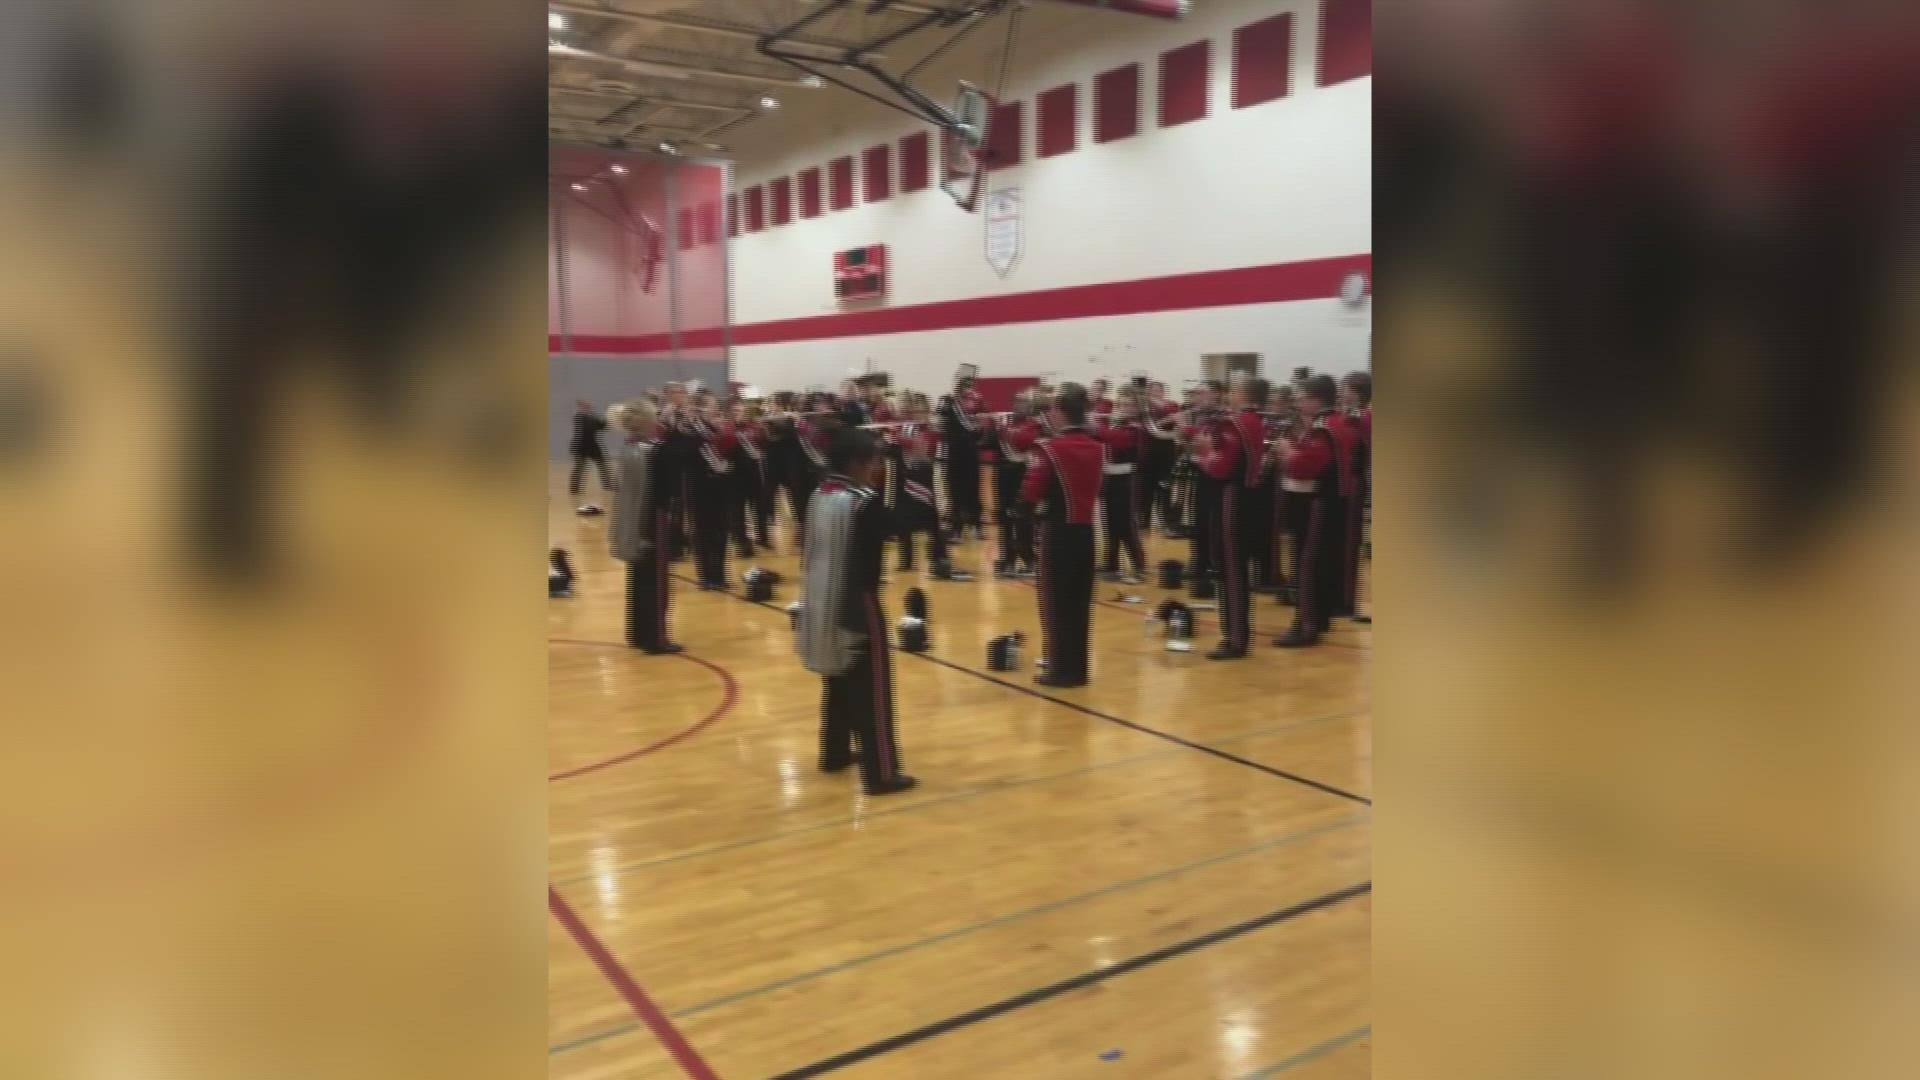 Weather got in the way of Bedford Marching Band's halftime show, but that didn't stop the show! With help from band director Cory Meggitt, here's Band of the Week!